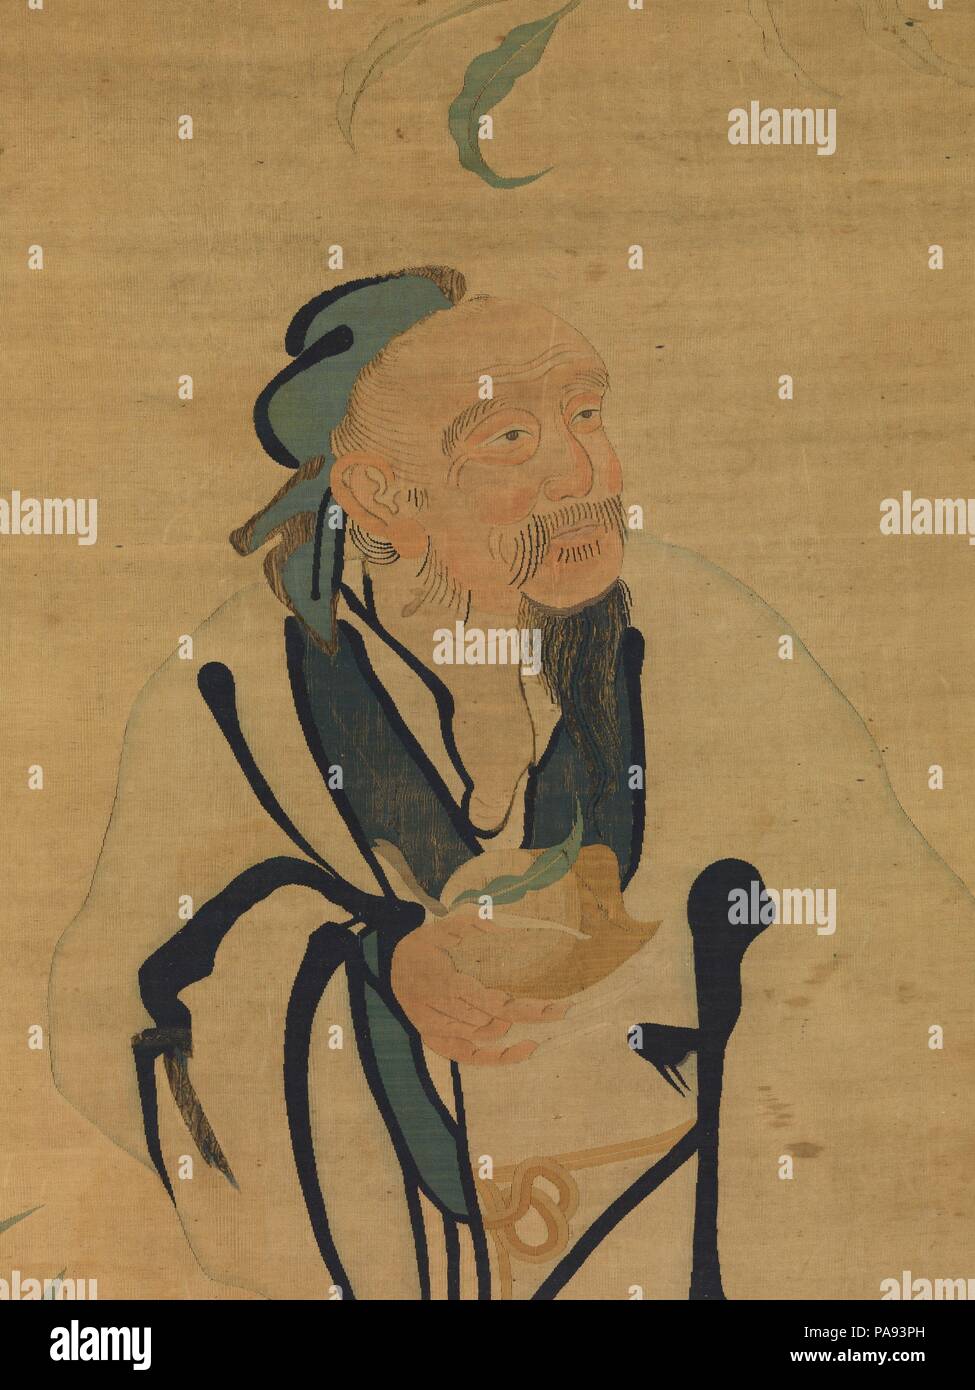 Immortal Holding a Peach. Culture: China. Dimensions: Overall: 46 x 24 in. (116.8 x 61 cm). Date: 16th century.  The figure on this silk tapestry panel is Dongfang Shuo who symbolizes wisdom and longevity. As a historical person, Dongfang (154-93 B.C.) was famed for his immense erudition and humorous speeches. In later legend, as seen here, he steals the magical peaches from the orchard of the Queen Mother of the West (Xiwangmu) and becomes a famous immortal. The layout and powerful outlines, also present in sixteenth-century painting, help date this tapestry. Found on both sides of the panel, Stock Photo